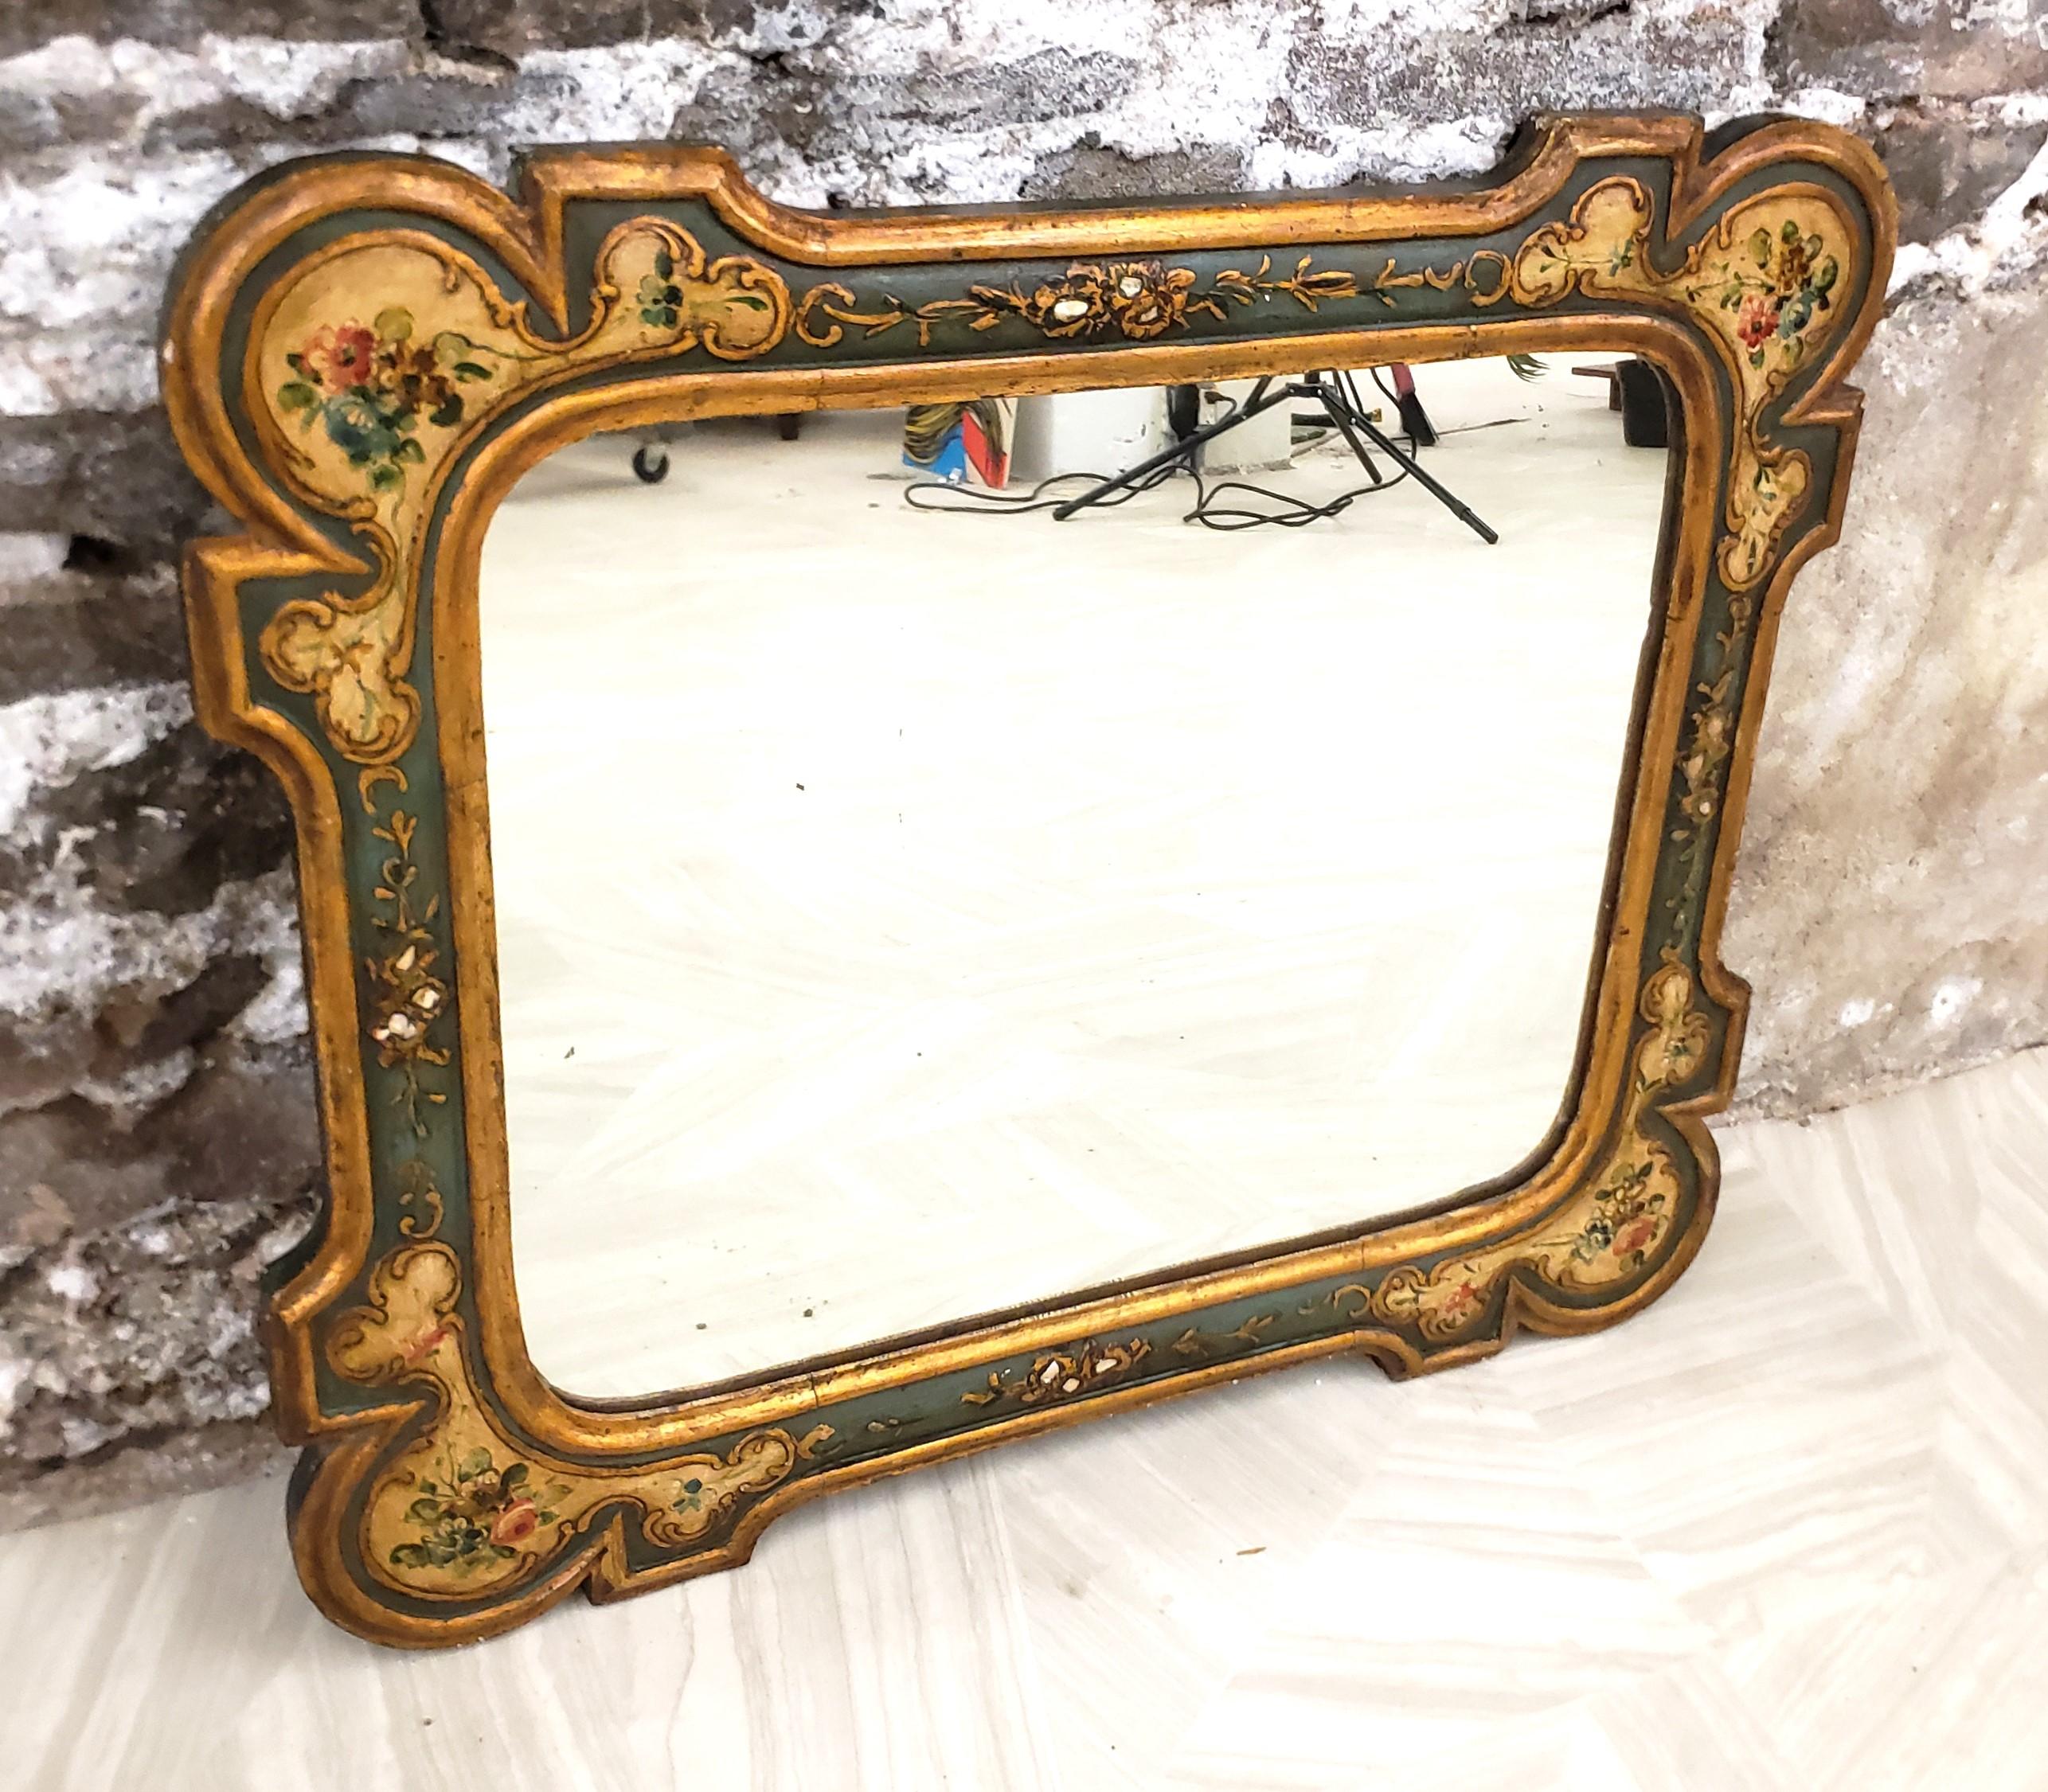 This antique wall mirror has no maker's signature, but is presumed t have originated from Italy and date to approximately 1900 and done in the period Florentine style. The mirror frame is composed of a softwood with a serpentine shape and